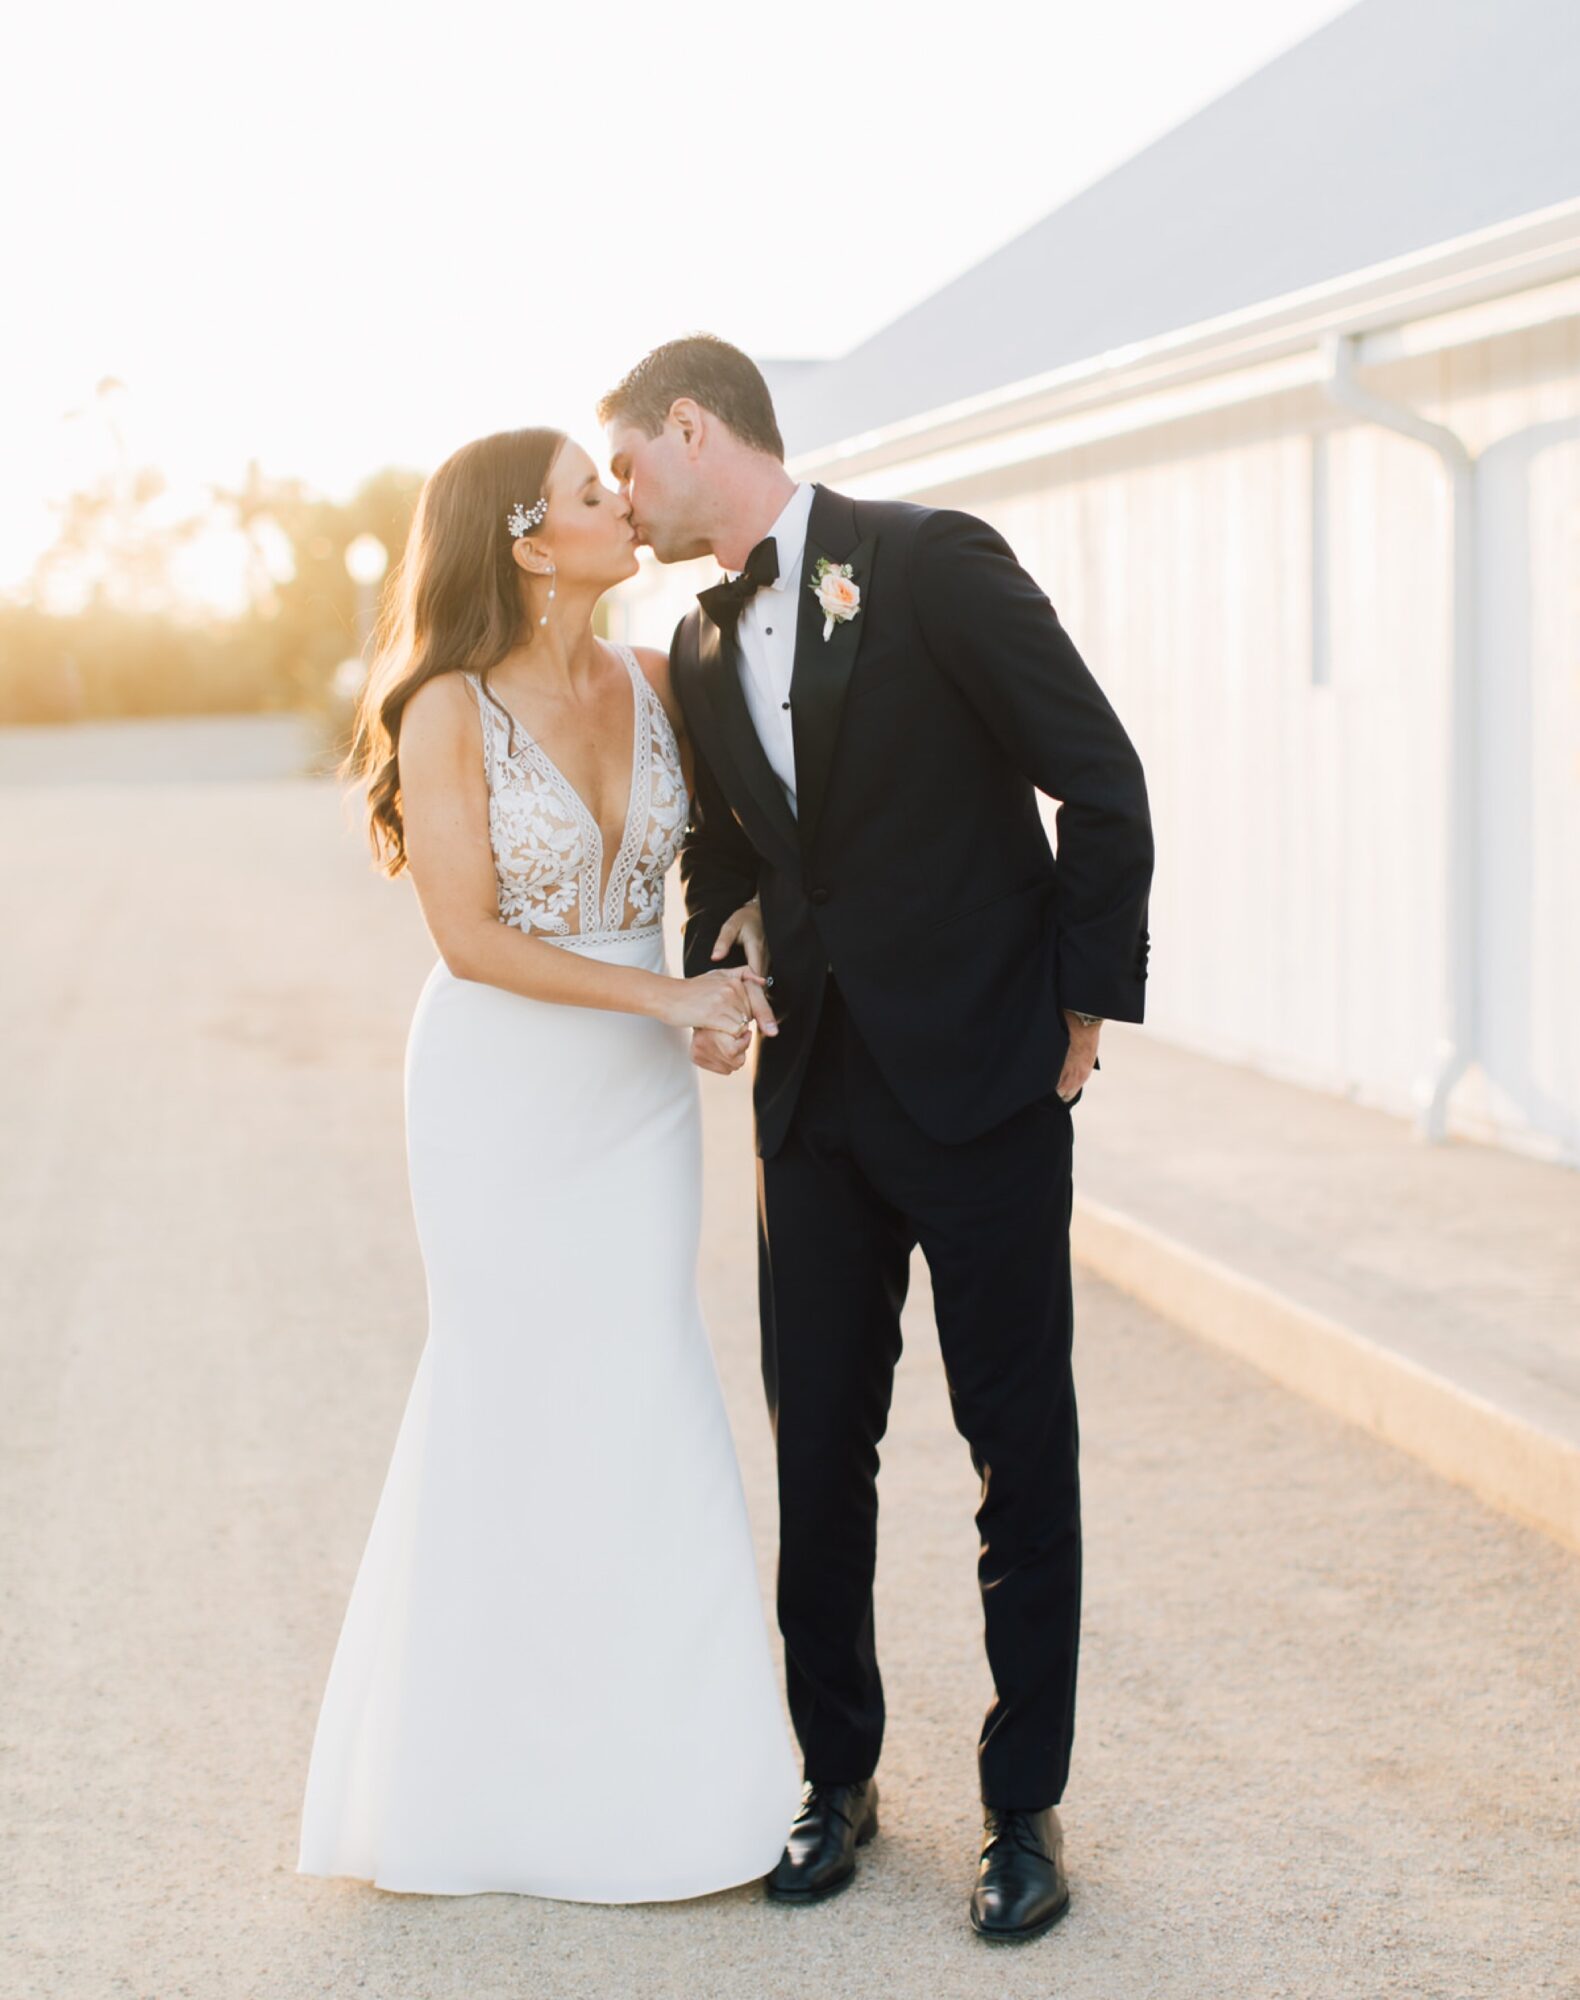 Bride and Groom kissing in the sunset glow at the White Barn Edna Valley photographed by san luis obispo wedding photographers jessica sofranko